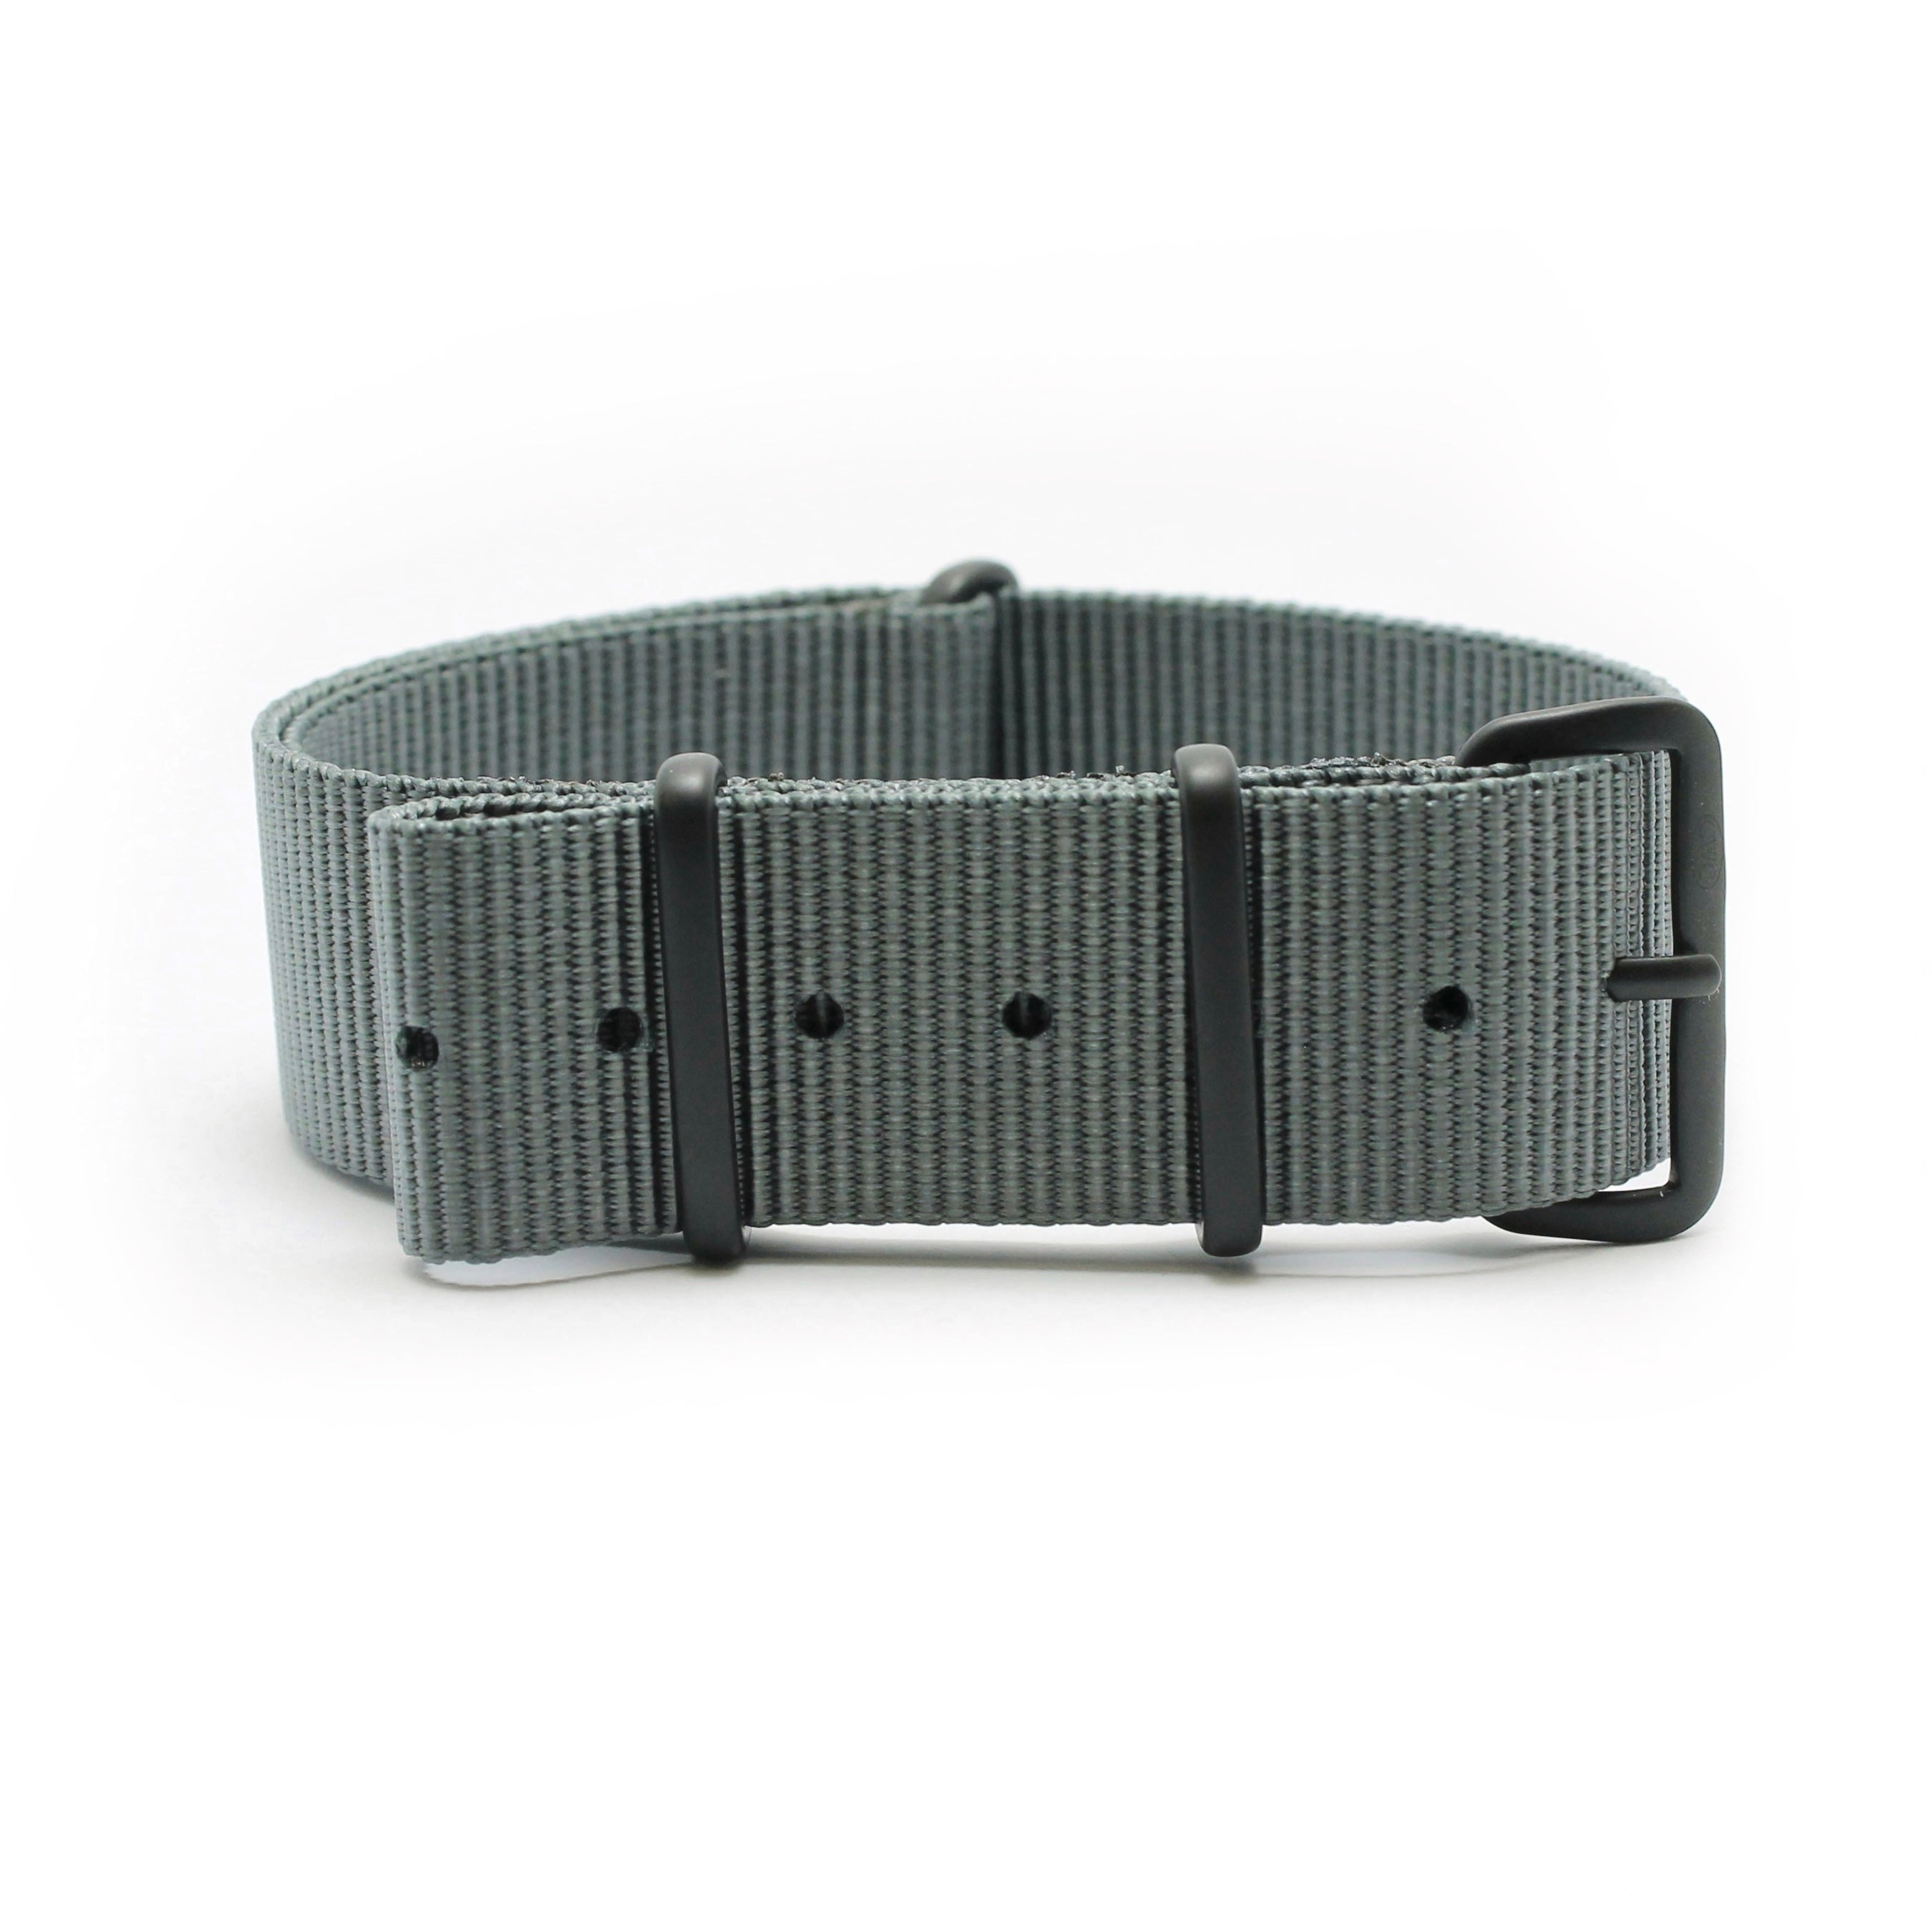 CABOT MILITARY WATCH STRAP - MILITARY GREY WITH MATTE BLACK BUCKLE